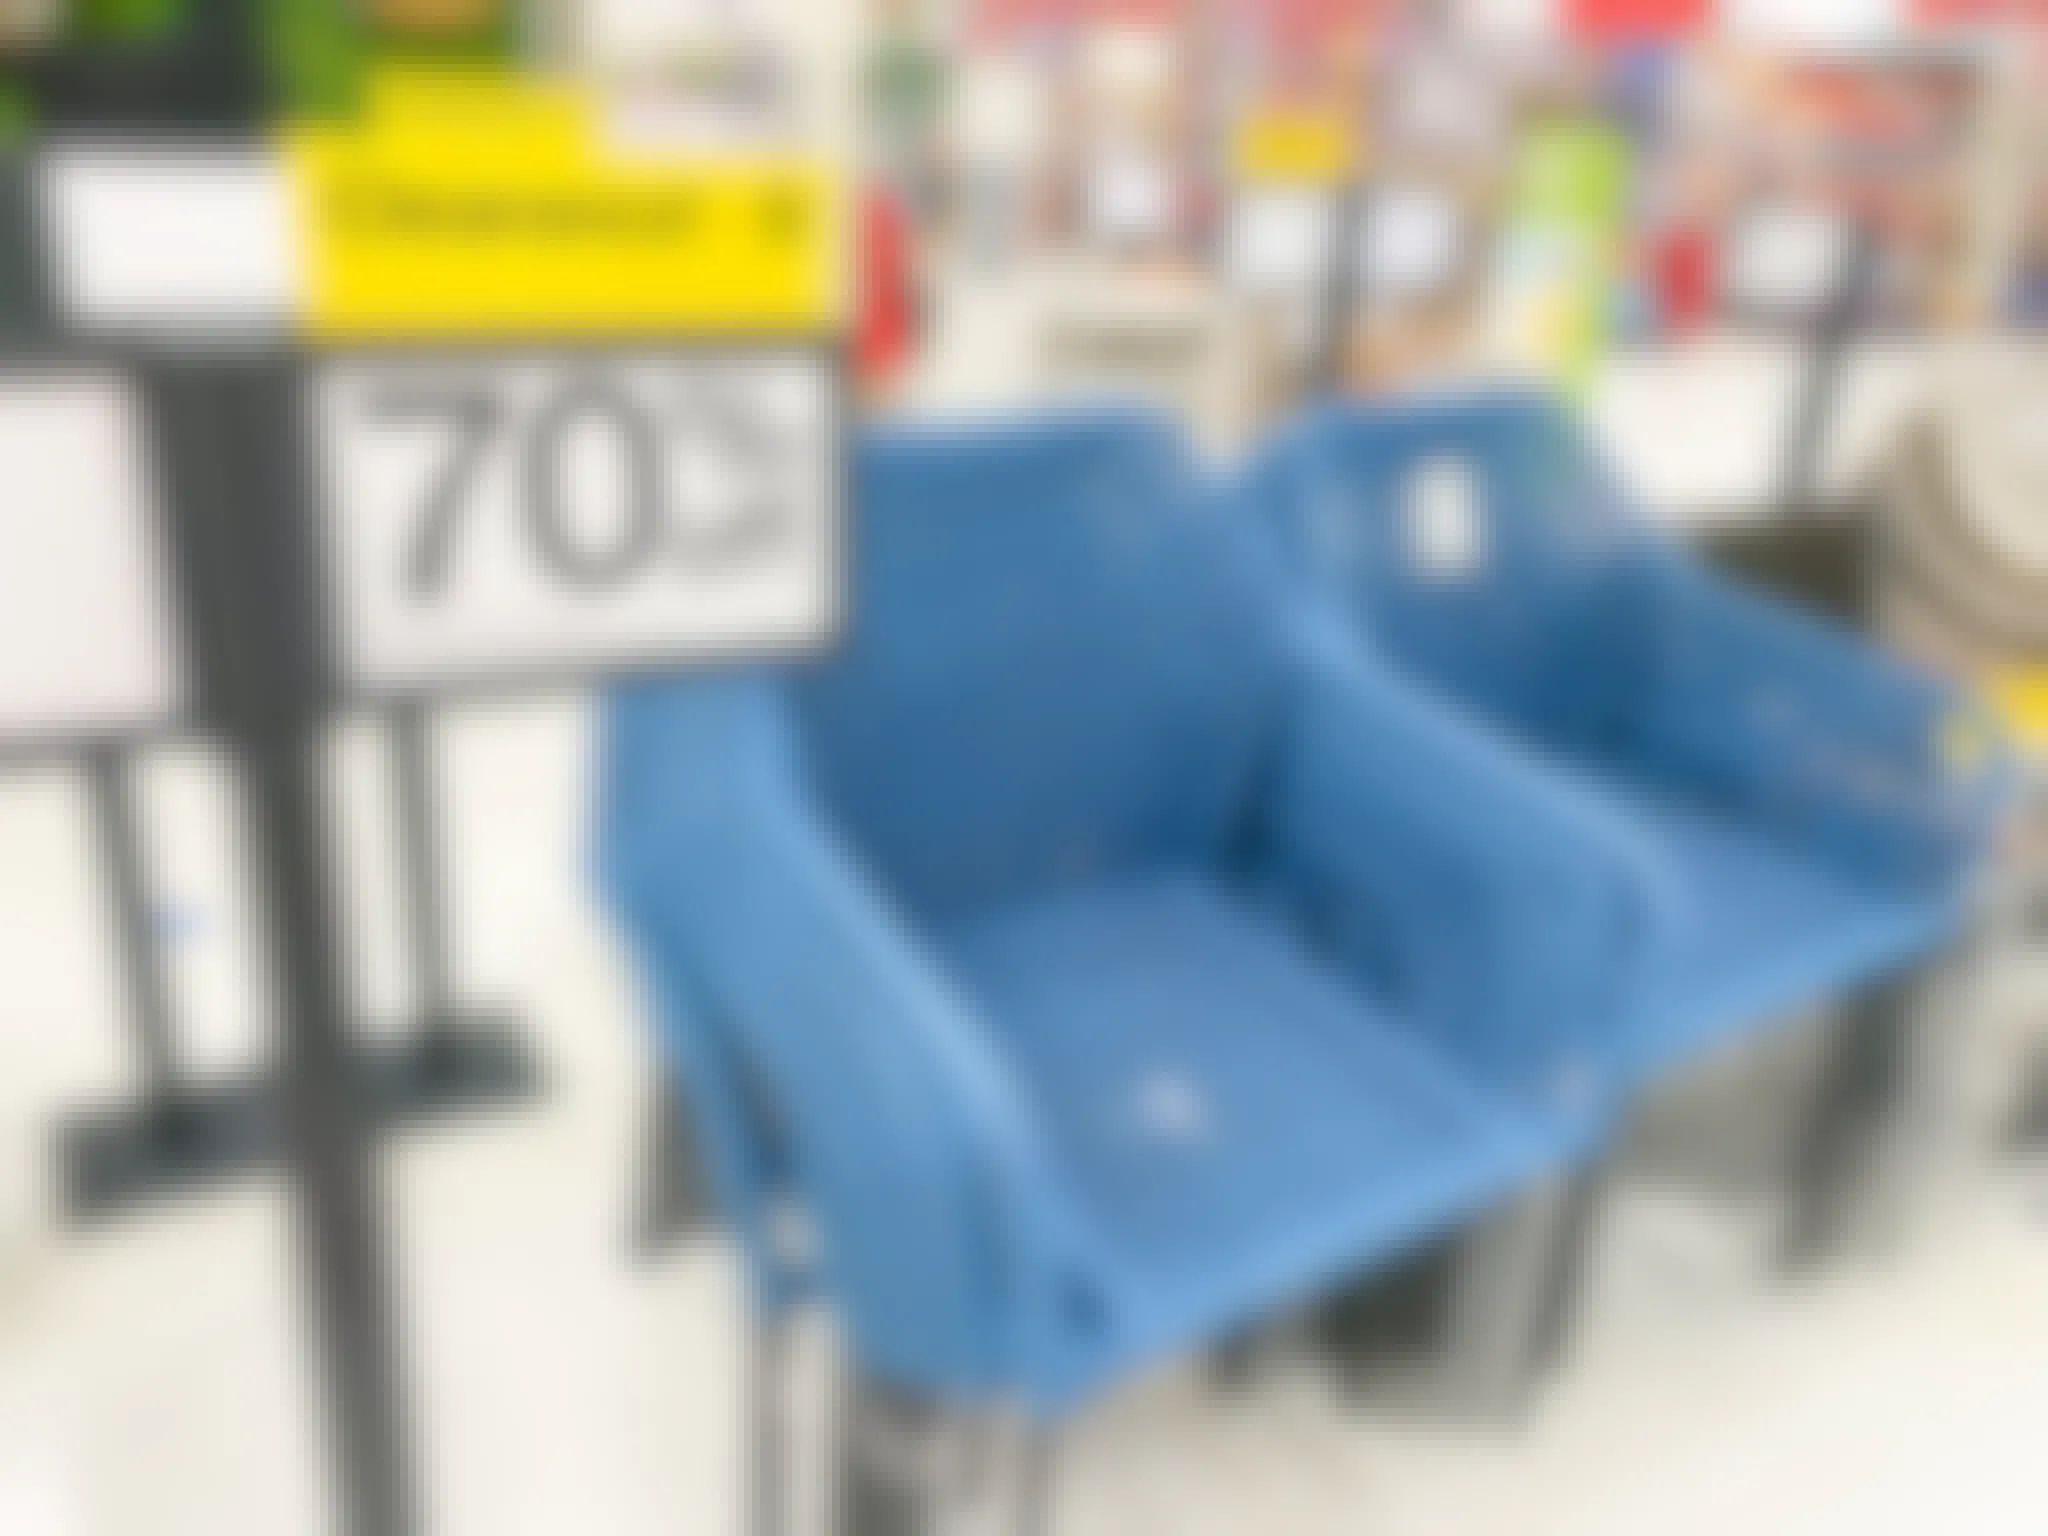 70% off clearance sale sign next to patio furniture at Target